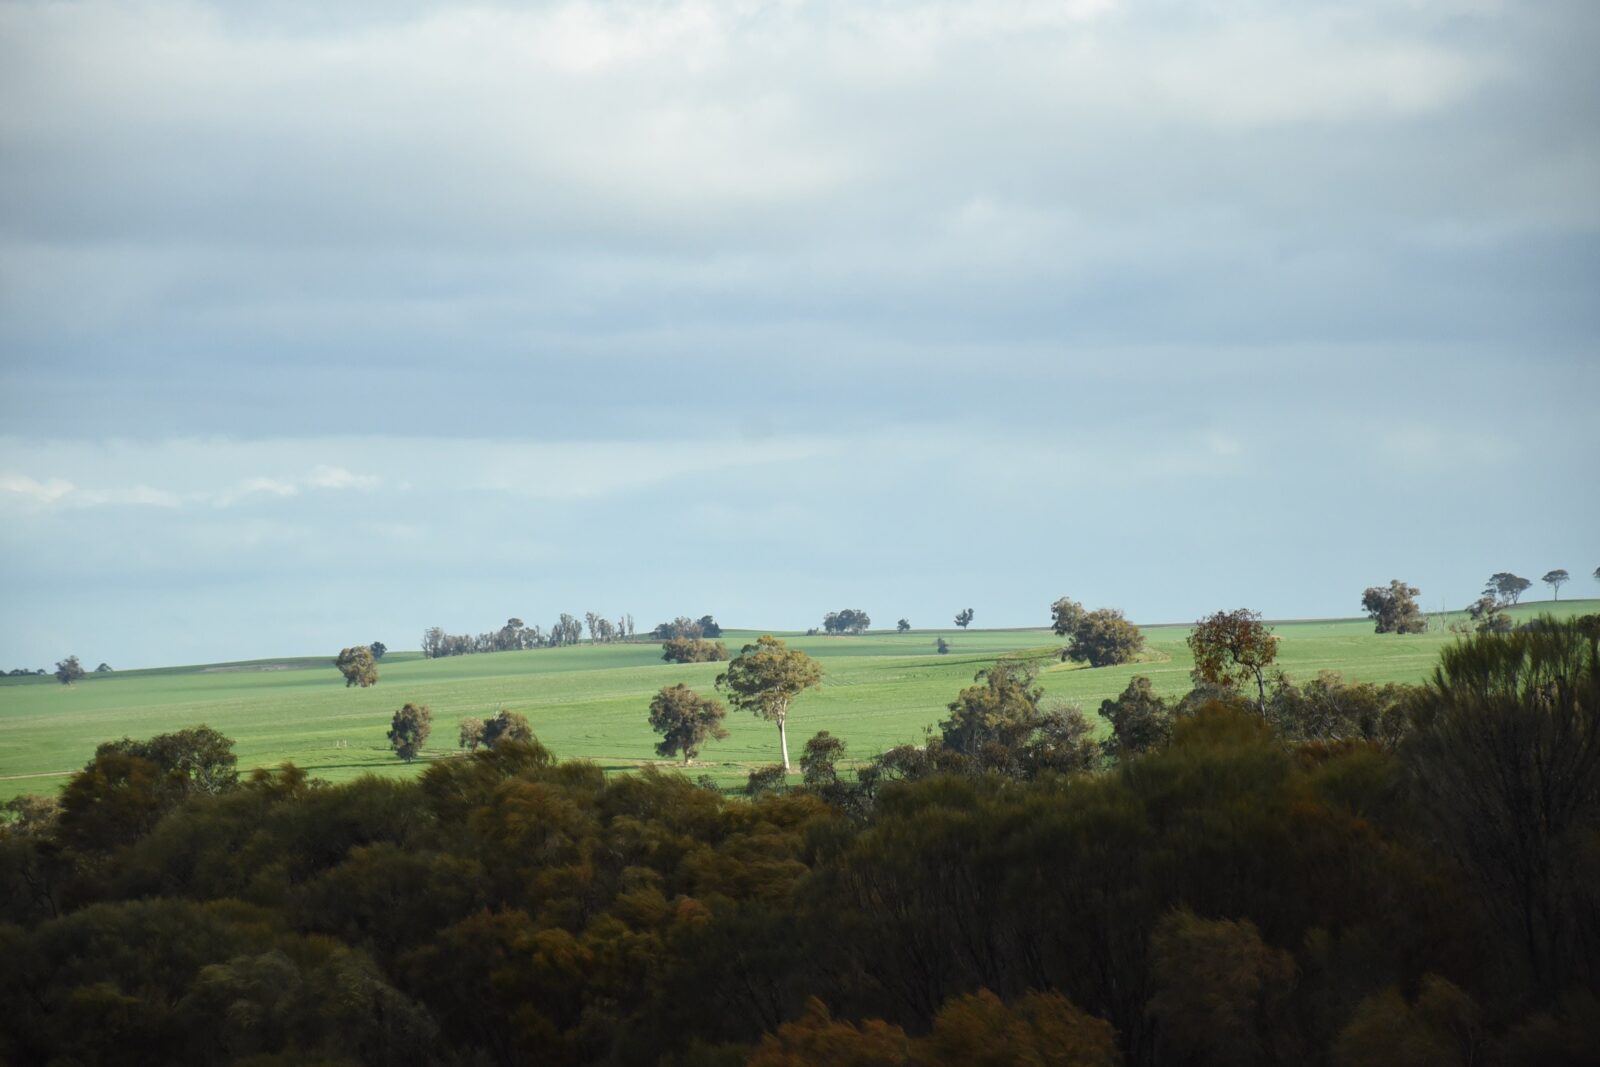 Picture is taken from the Yilliminning Rock overlooking the peaceful green Narrogin landscape.